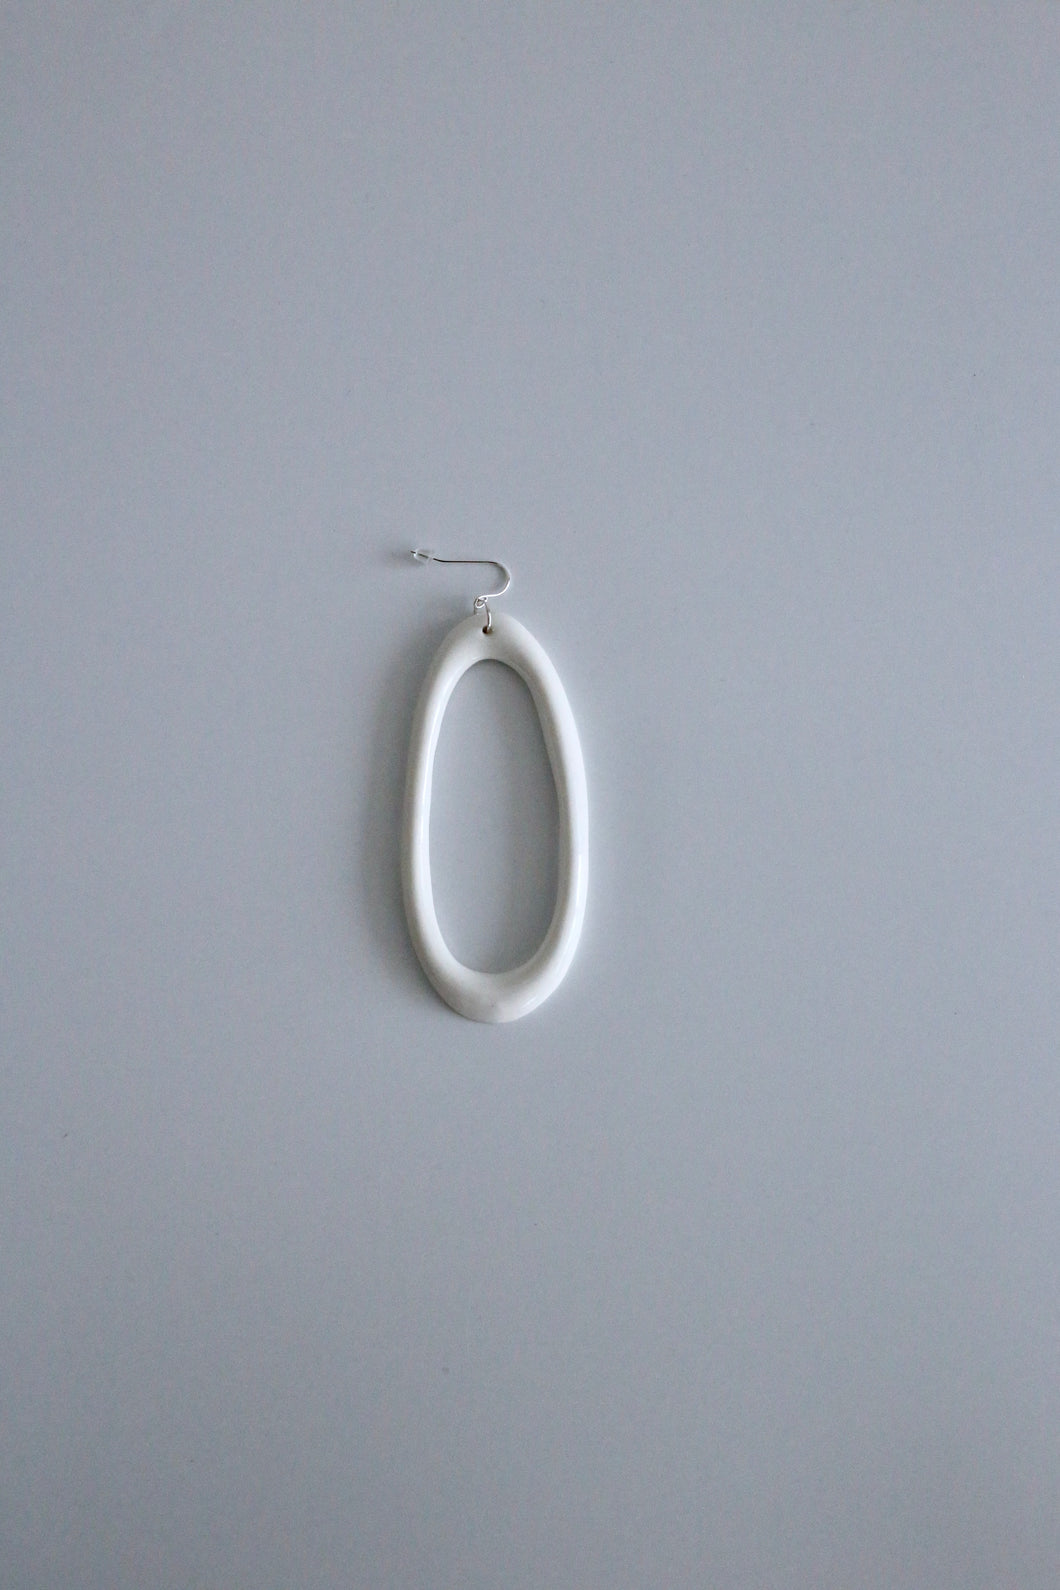 【ARC objects】egg earring 片耳ピアス